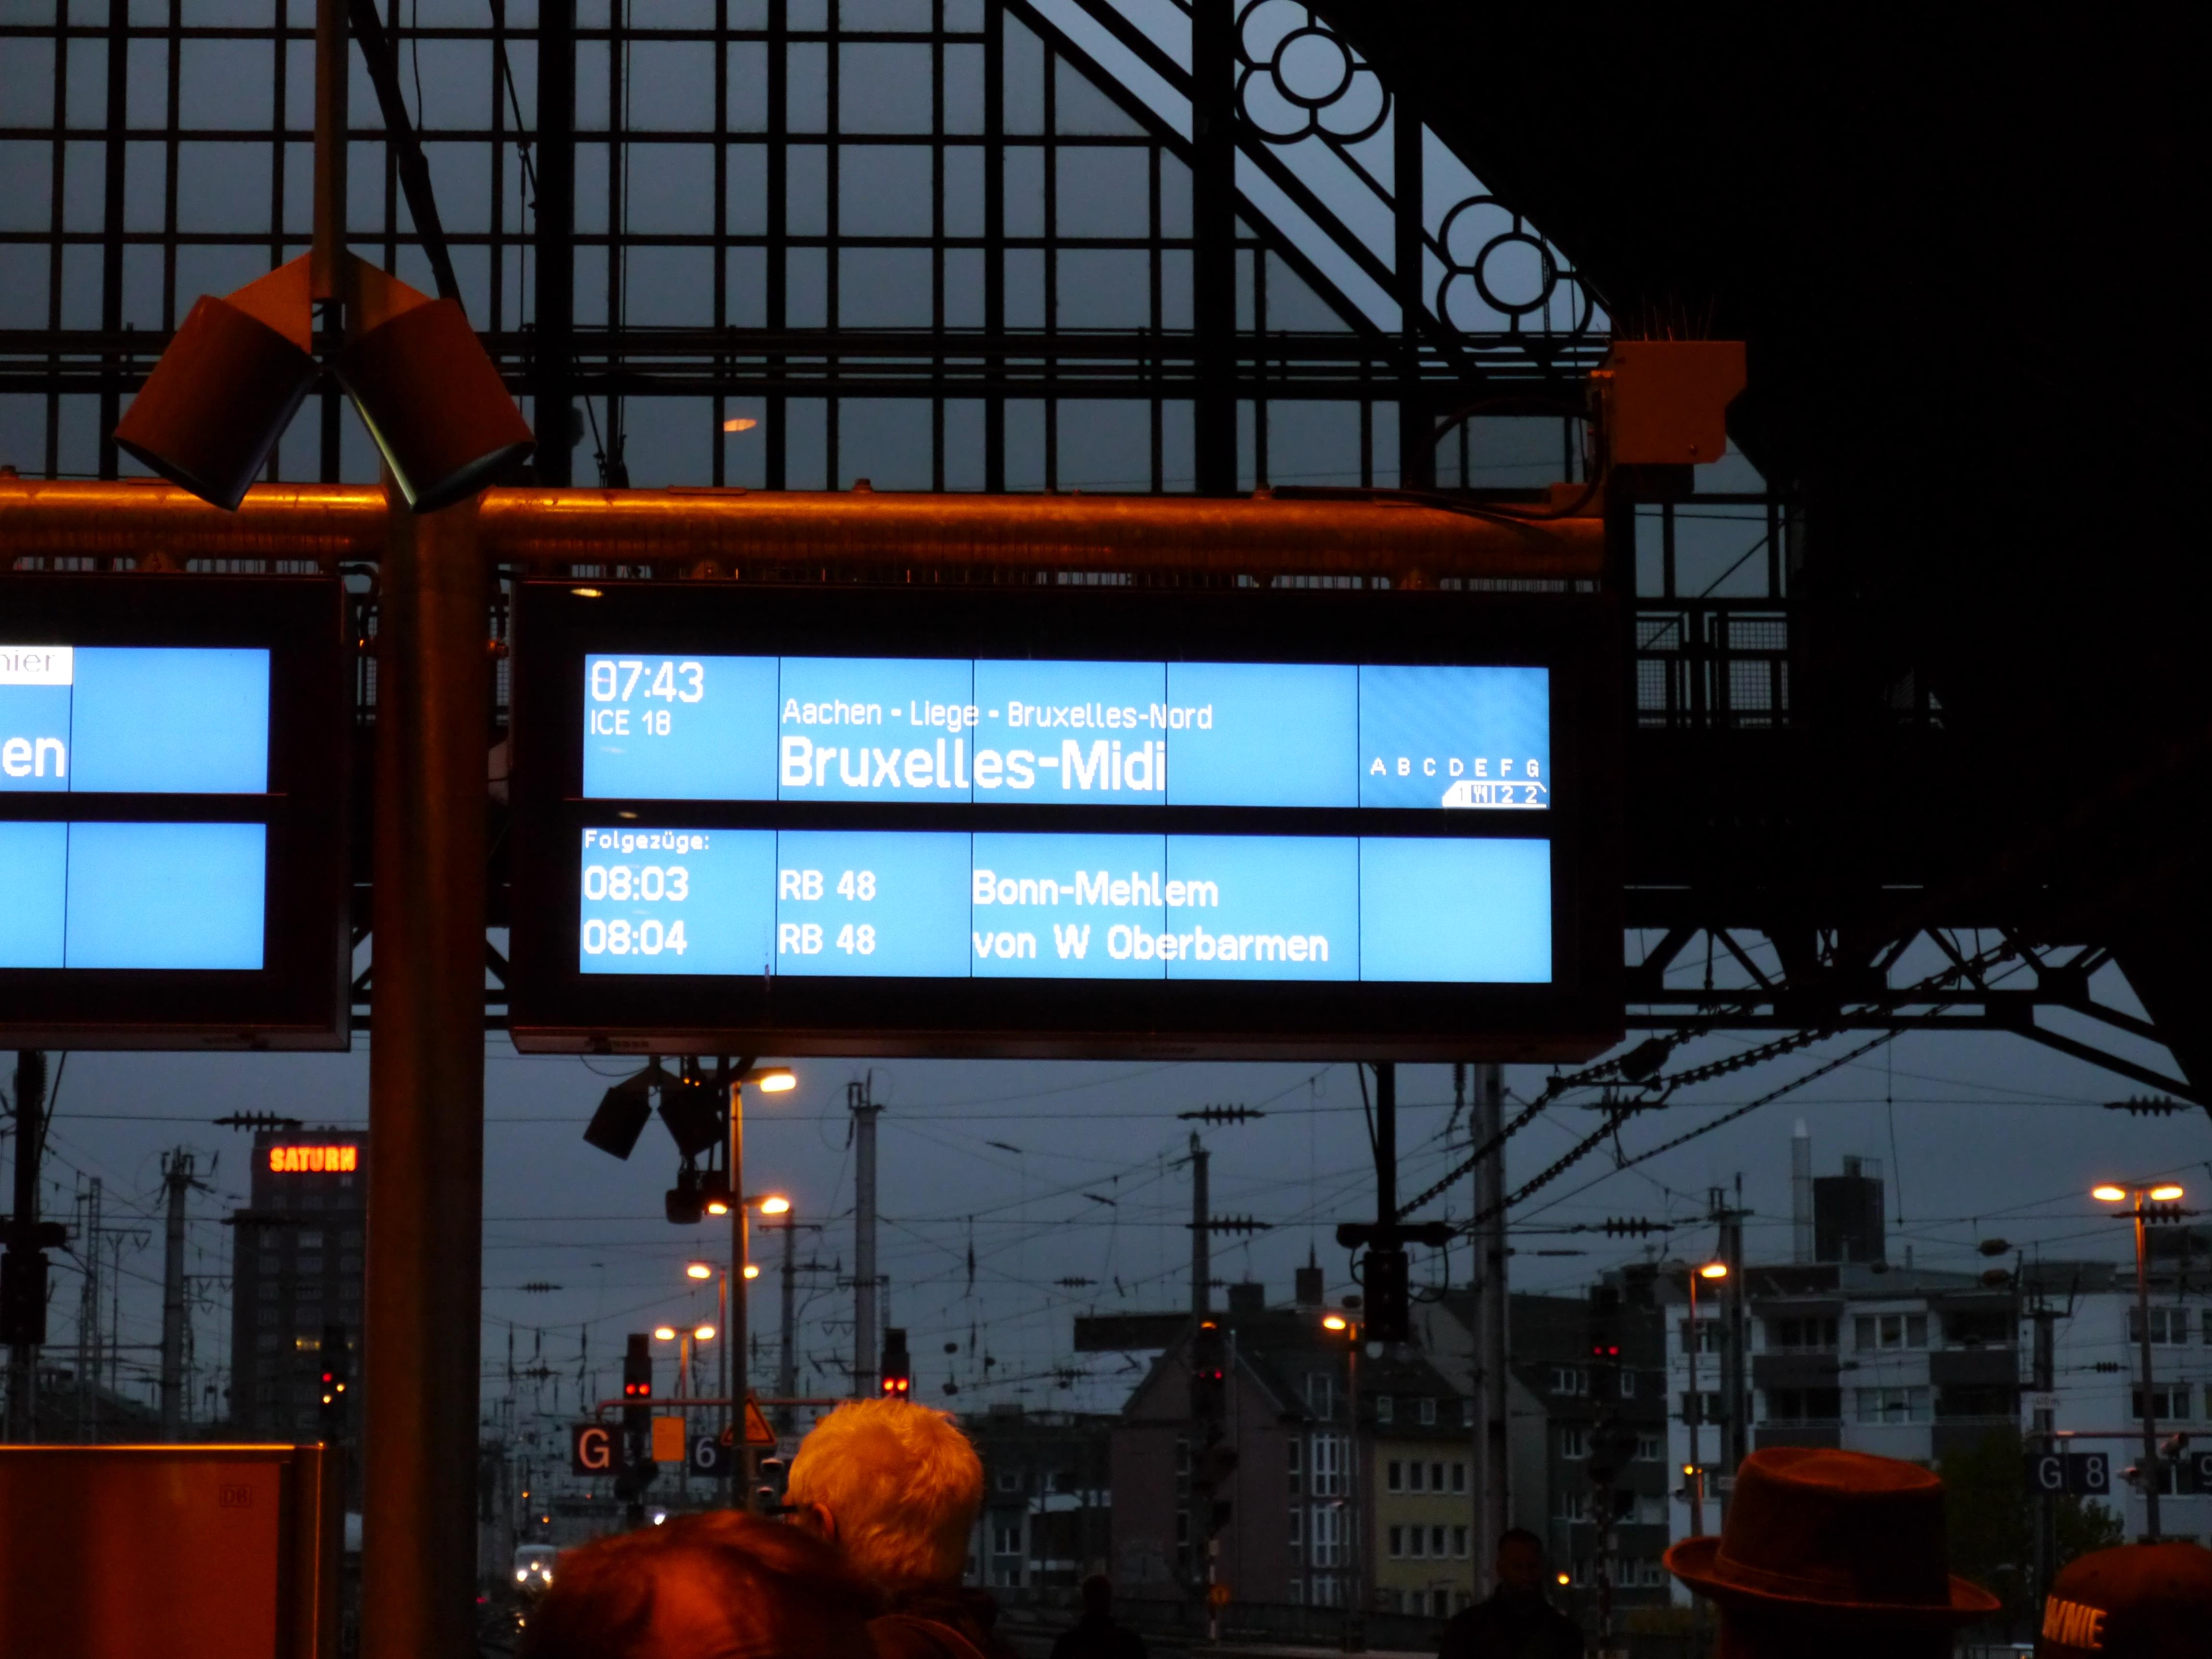 Display of the train to Brussels at the main station of Cologne.